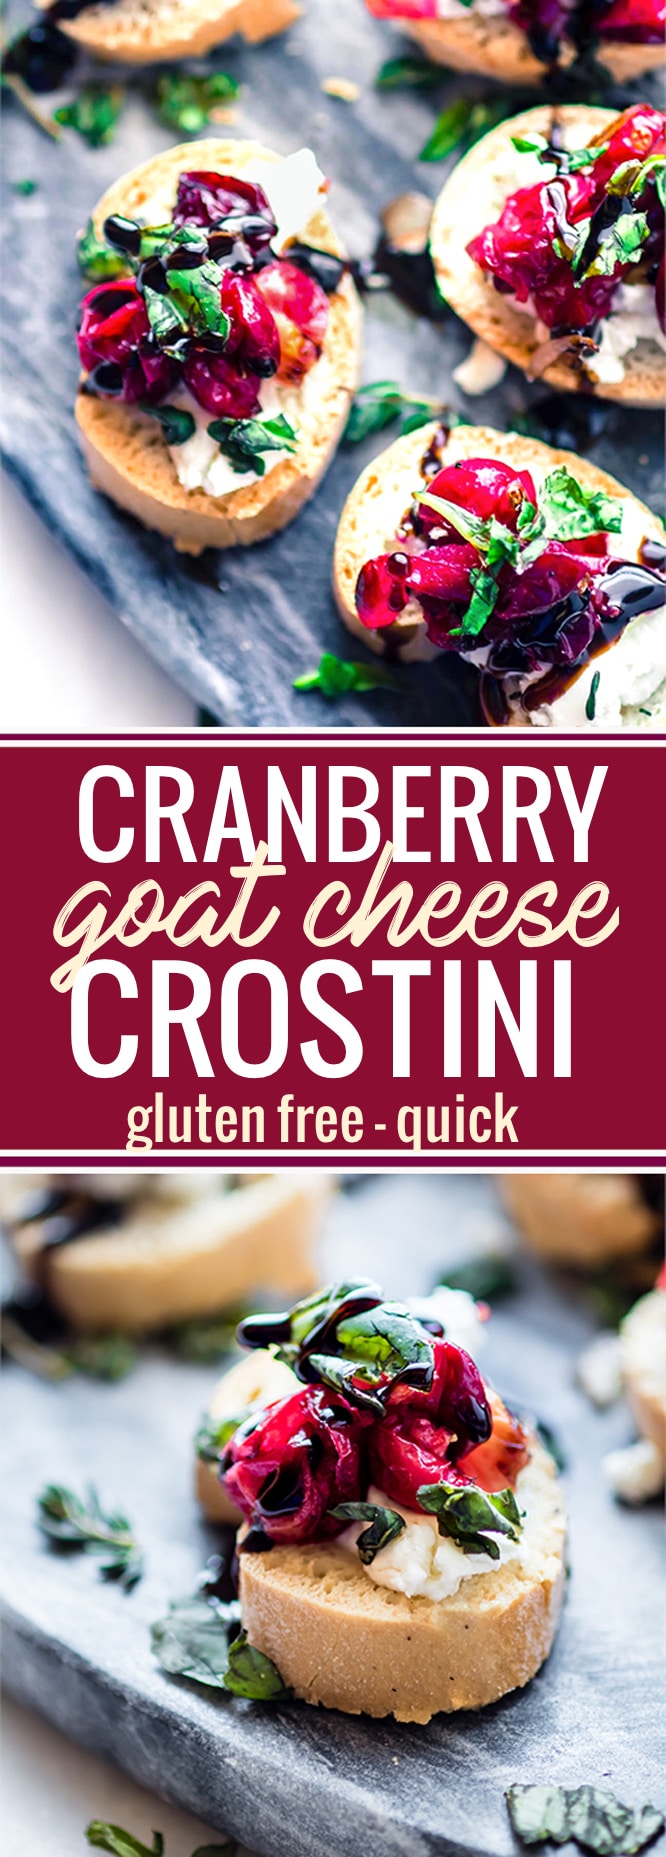 This quick cranberry goat cheese gluten free crostini is made with roasted balsamic cranberries, sweet onion, then topped with fresh basil and balsamic glaze. Super quick, easy, healthy, and a delicious! One of my favorite crowd-pleasing appetizers. www.cottercrunch.com @cottercrunch